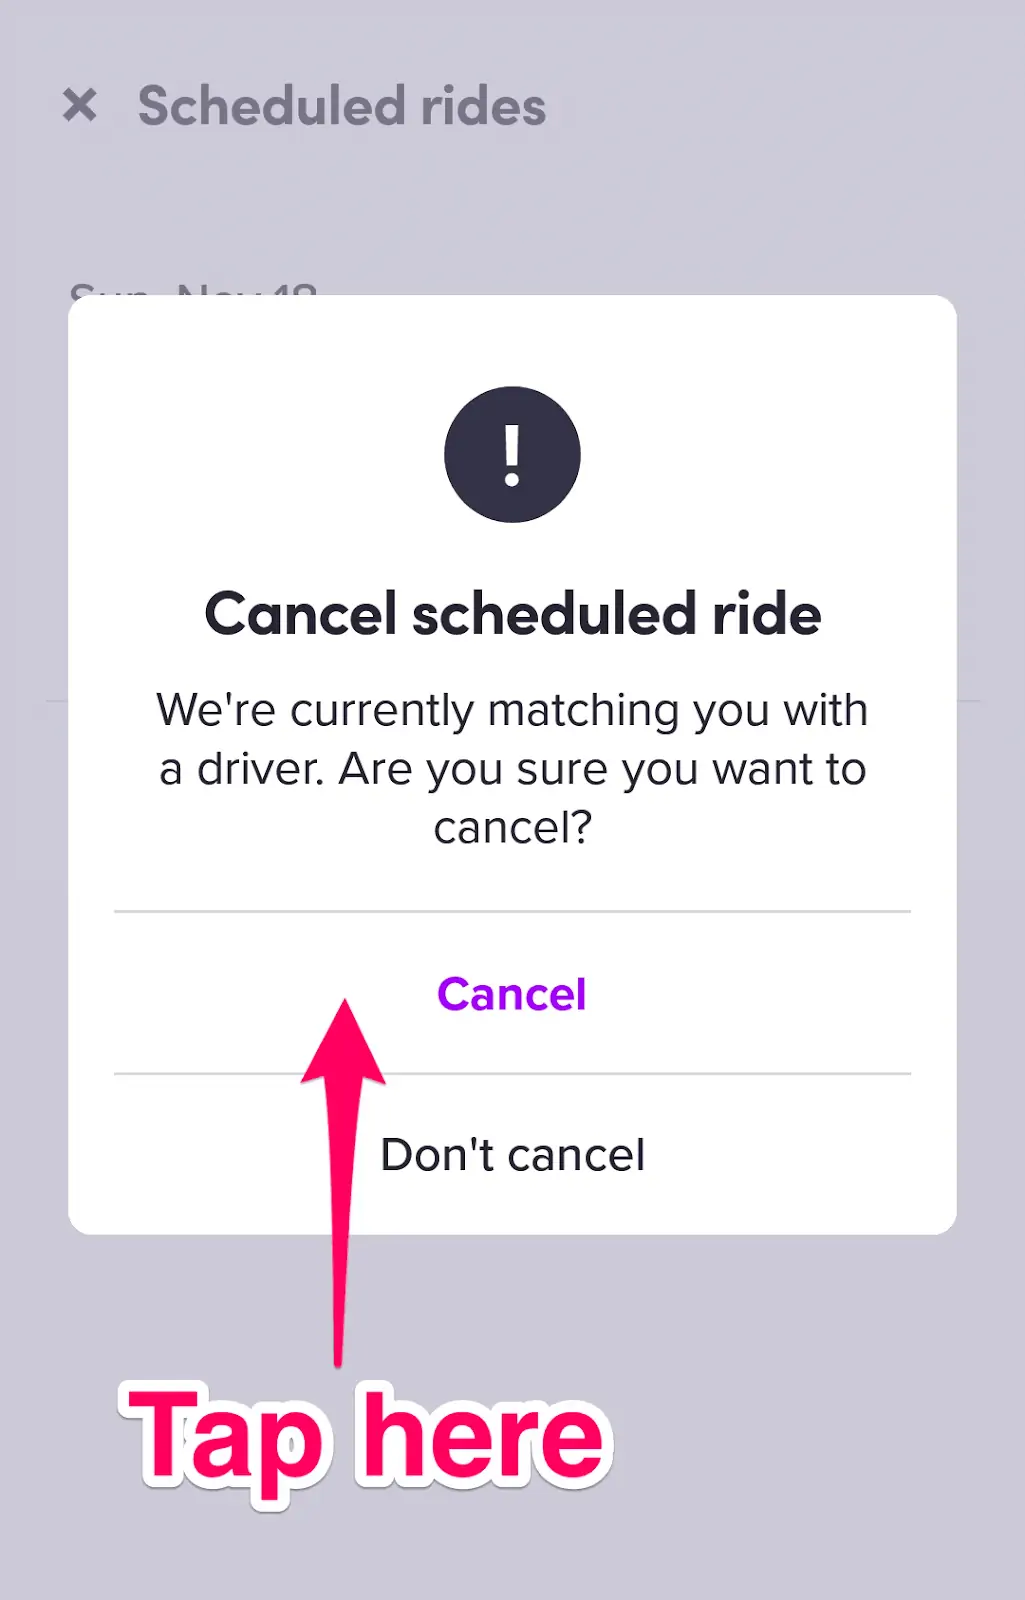 How to Schedule a Lyft Ride - Confirm cancellation